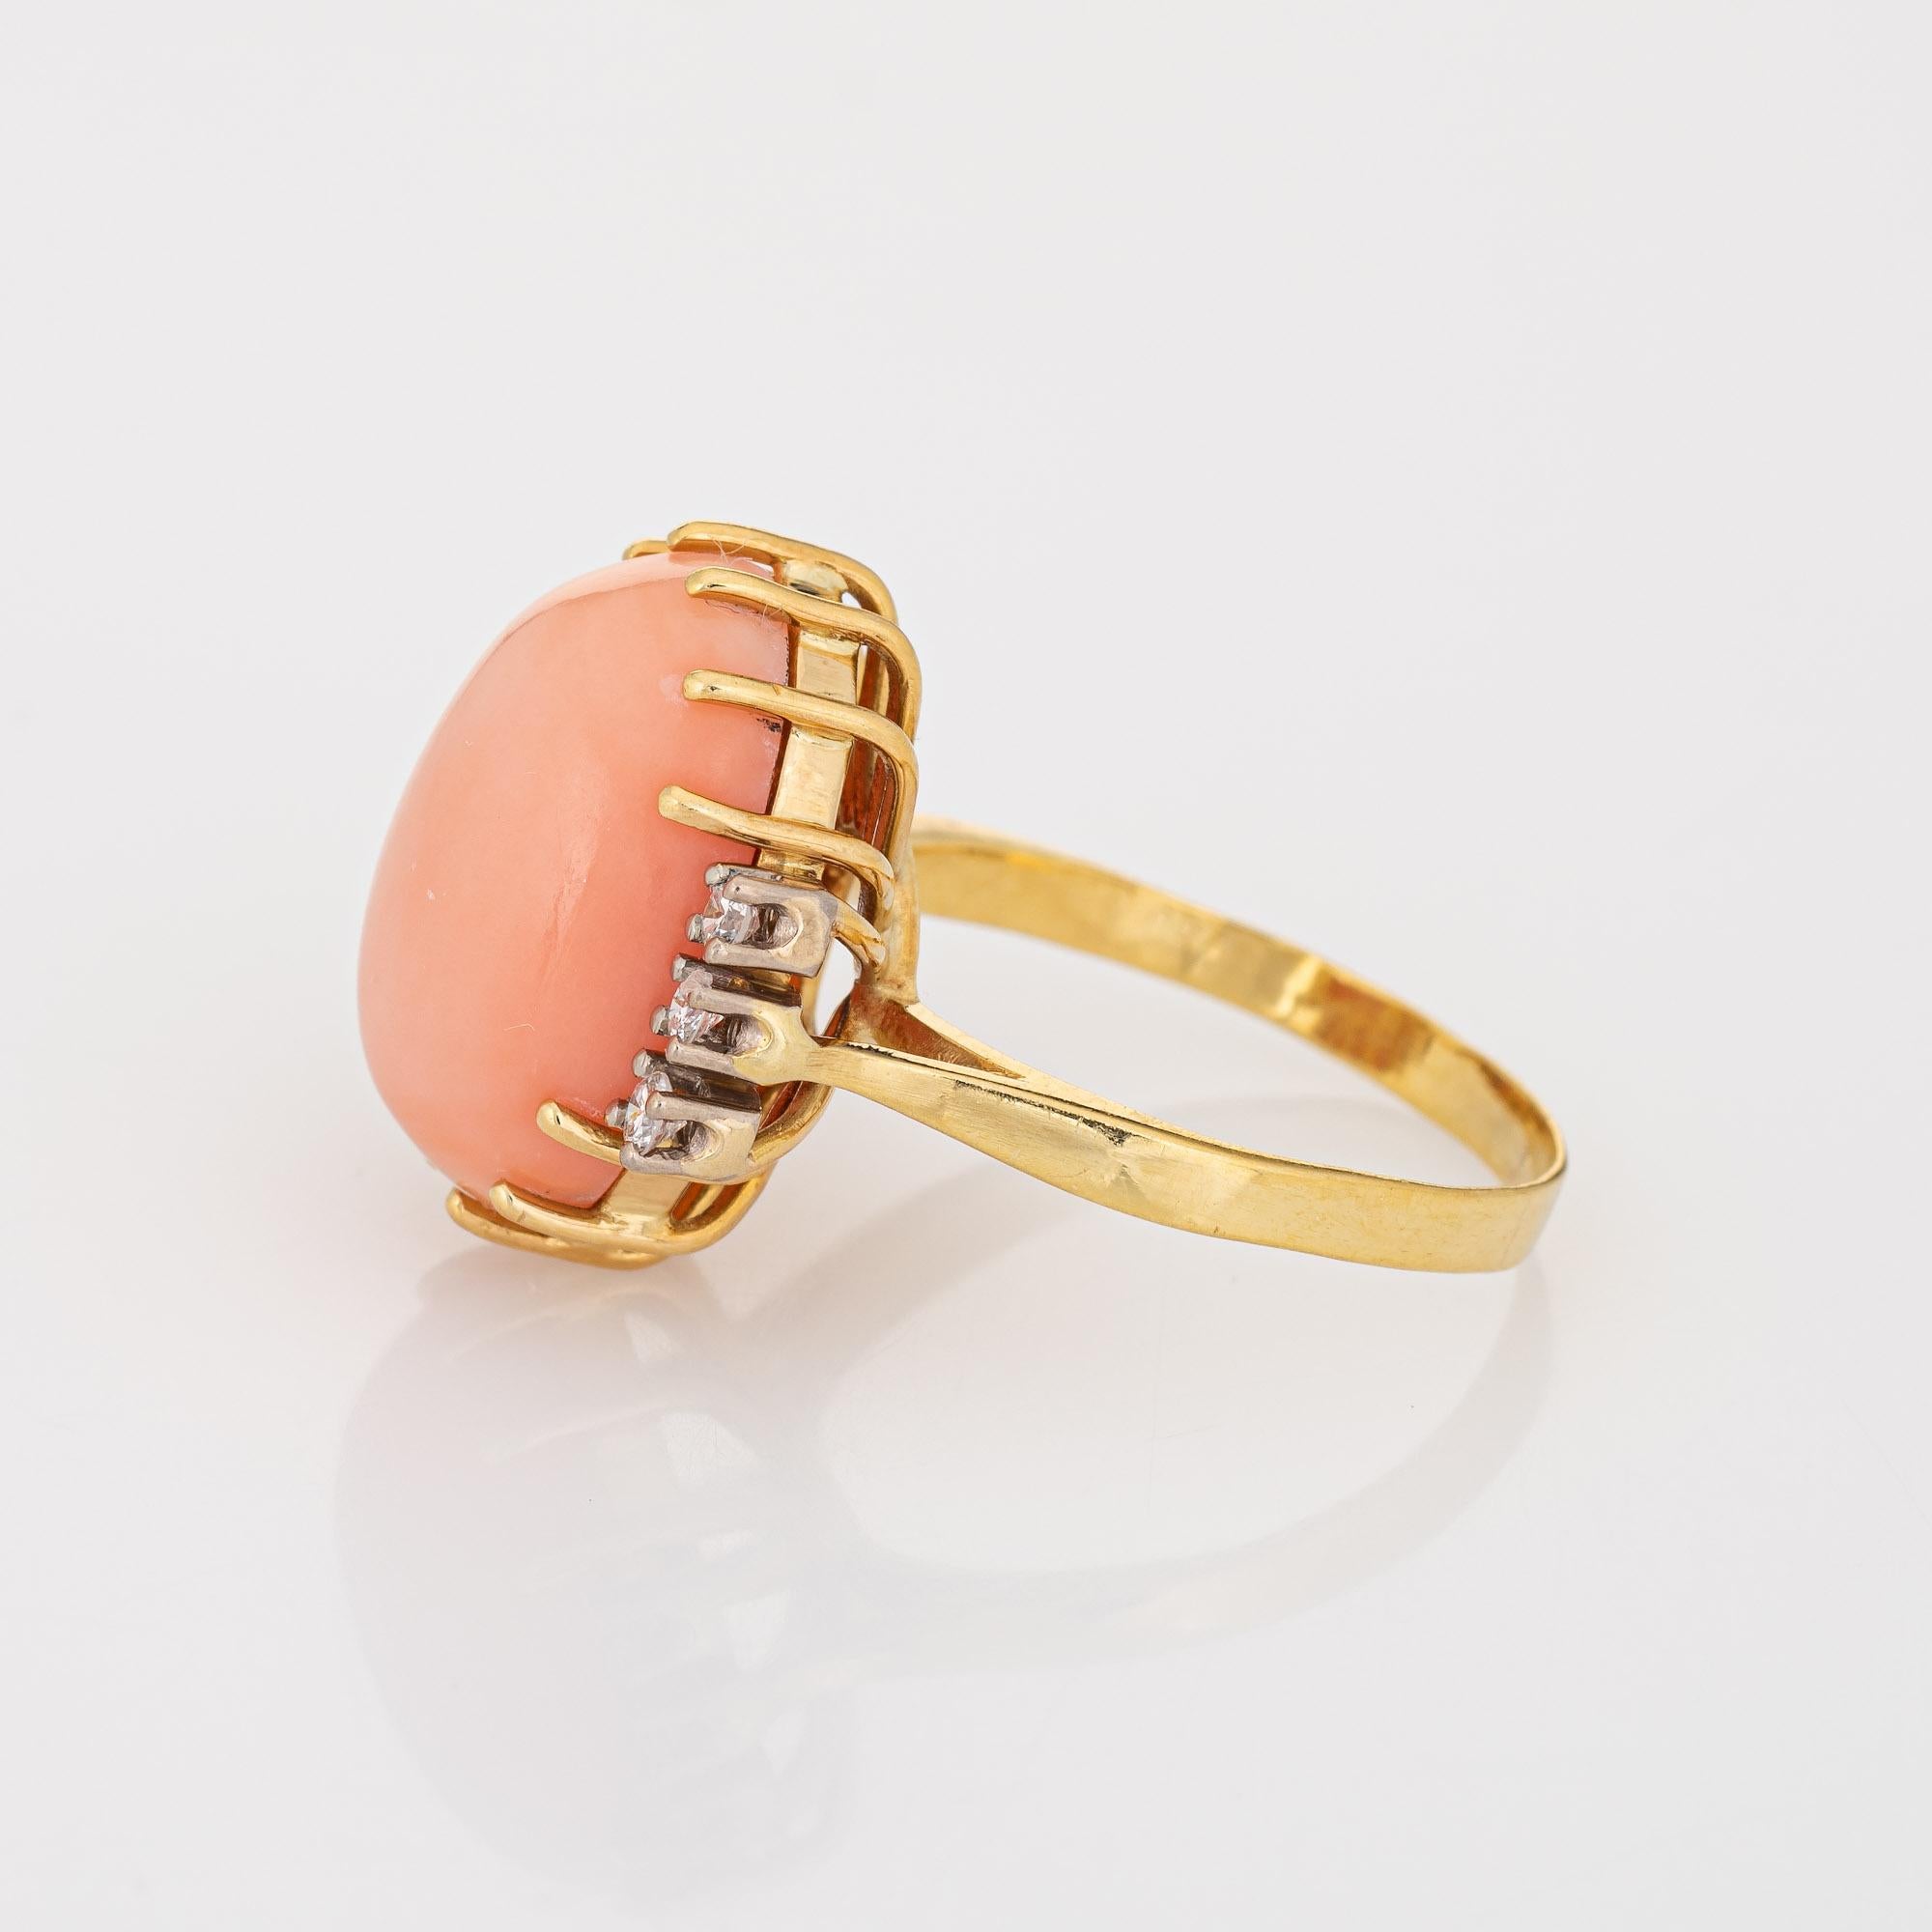 Cabochon Light Peach Coral Diamond Ring Vintage 18k Yellow Gold Cocktail Jewelry